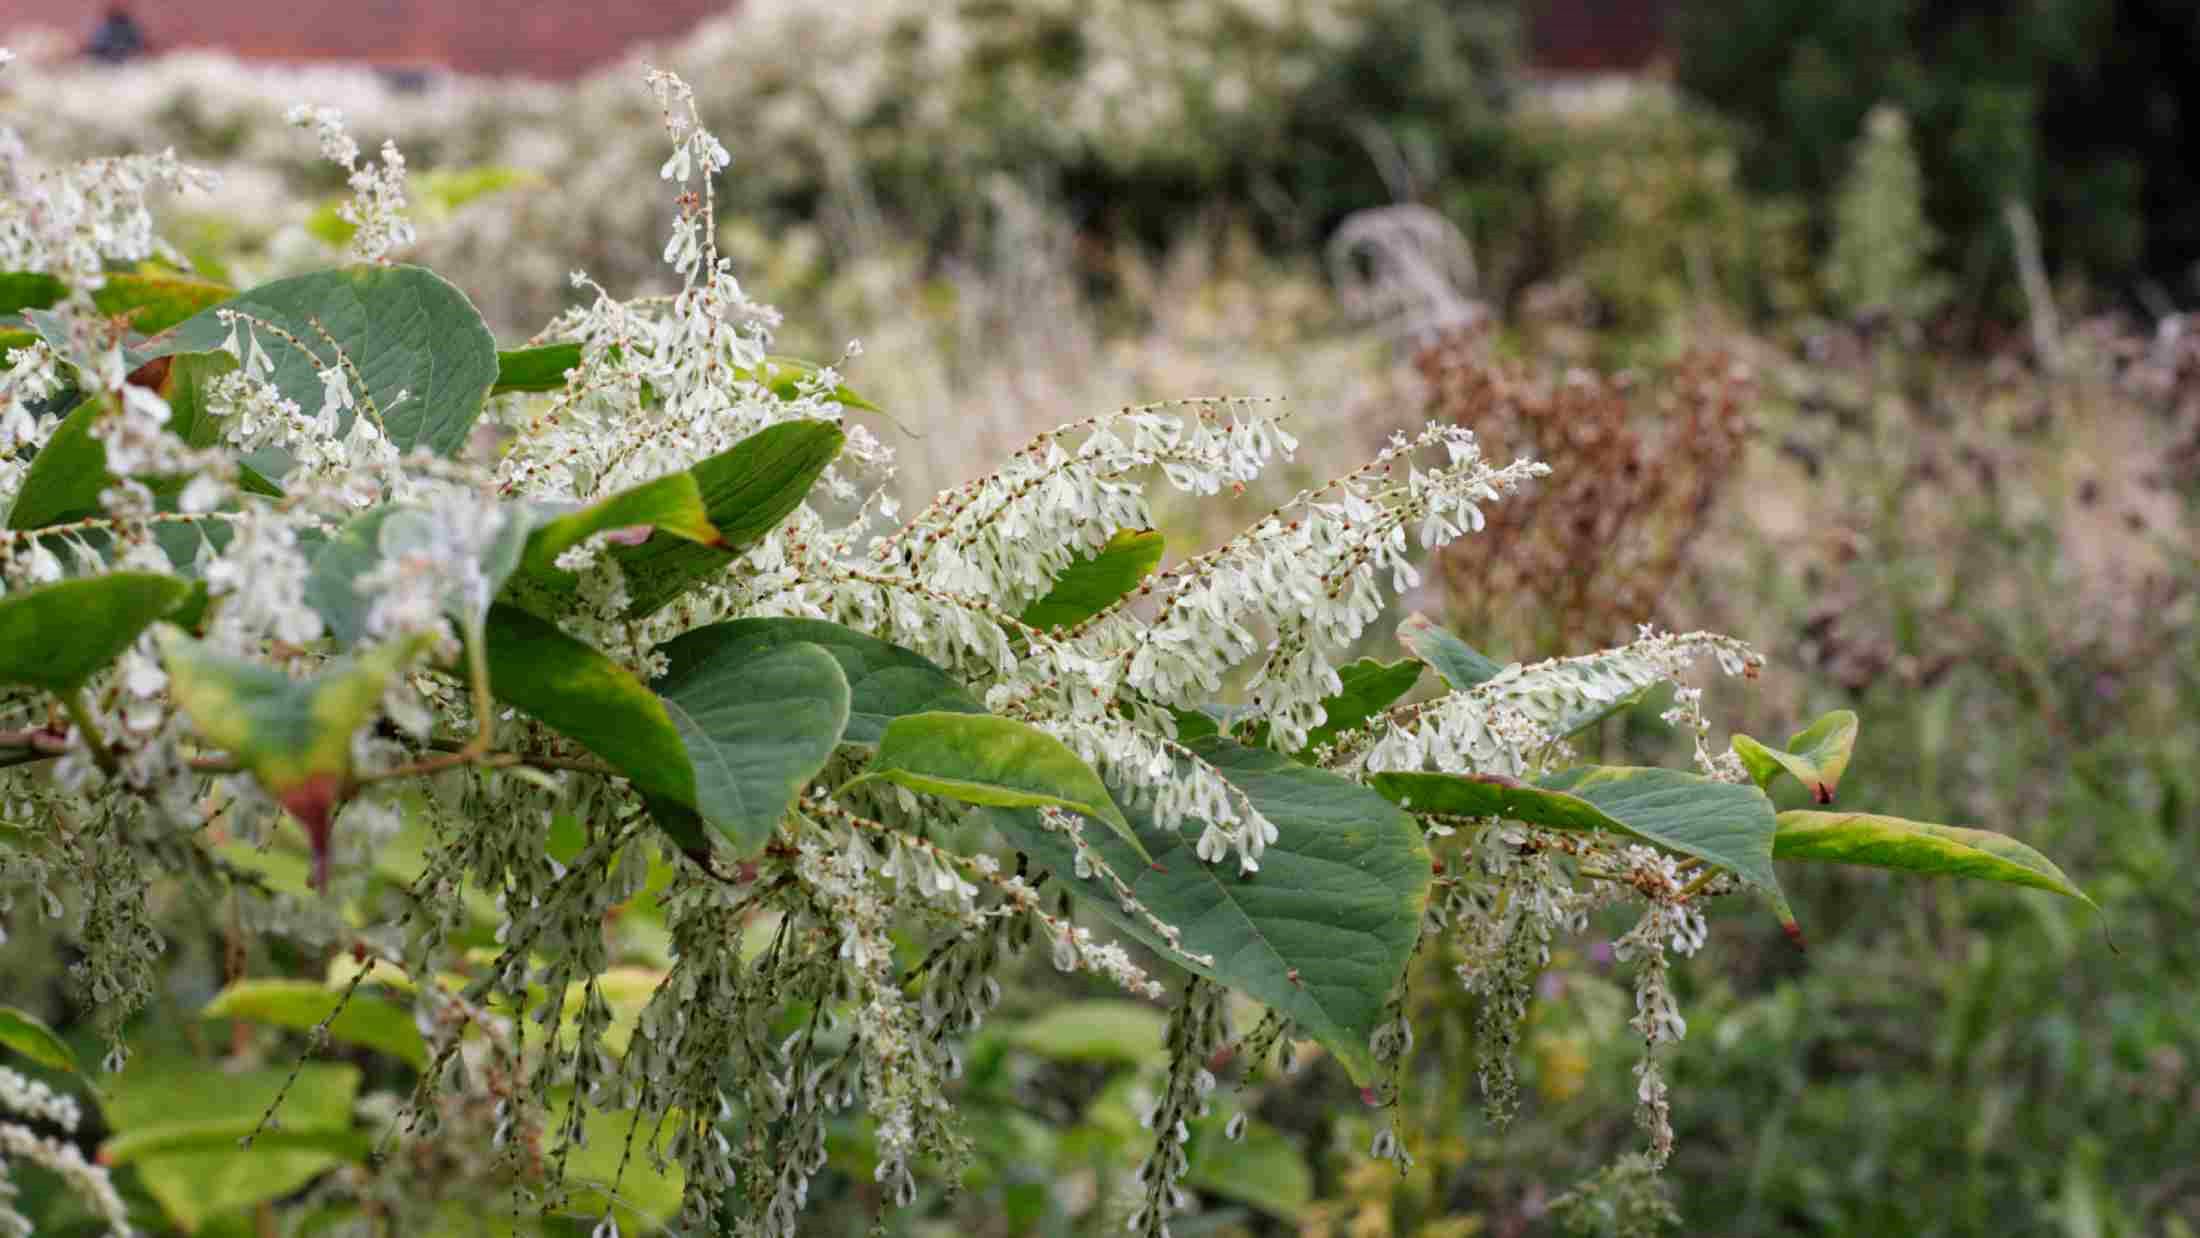 Flowering plant invader Japanese knotweed otherwise known as Fallopia japonica